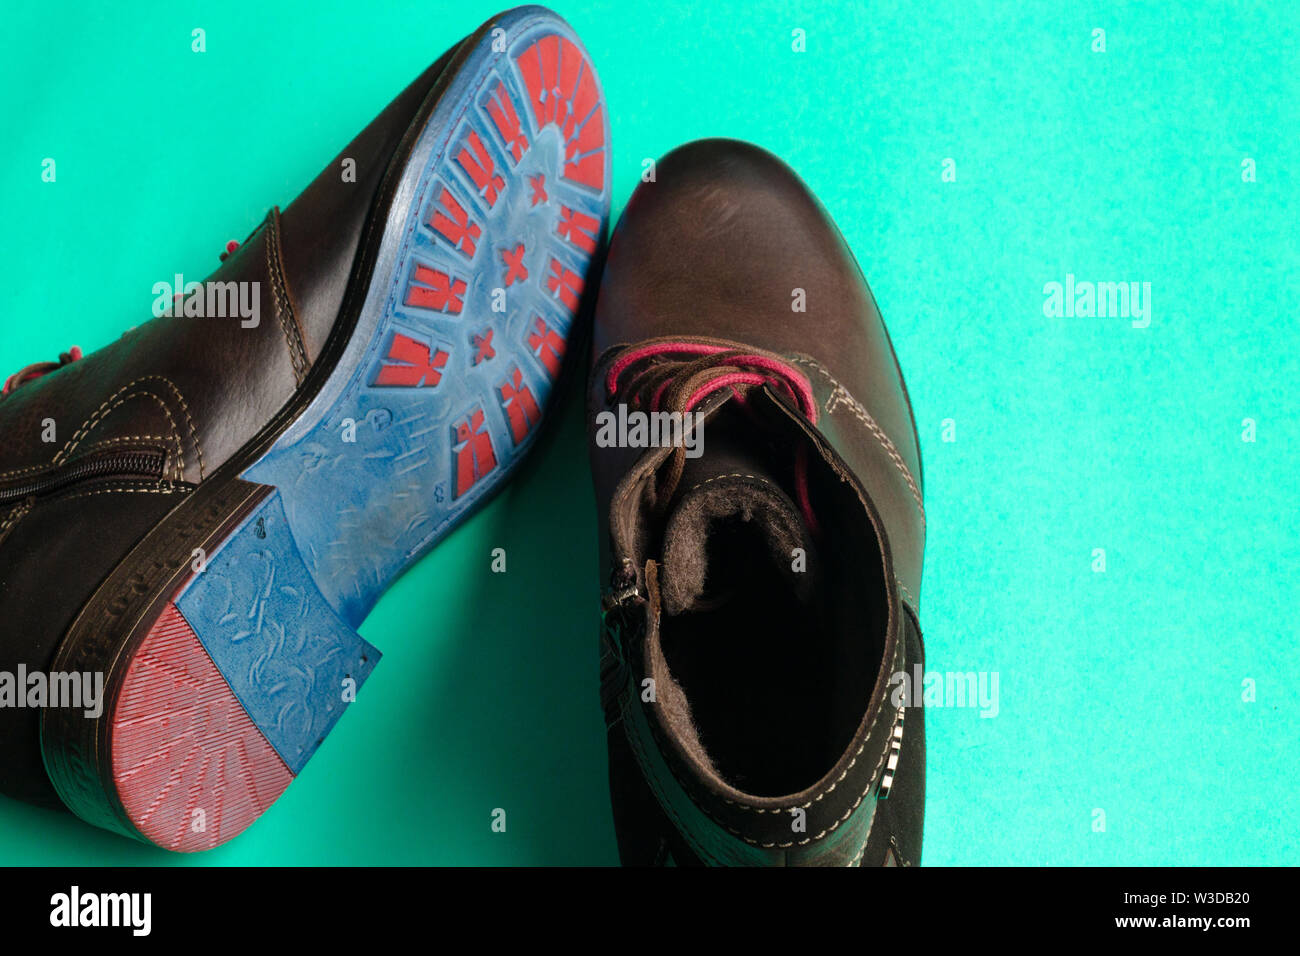 Leather men's shoes Stock Photo - Alamy